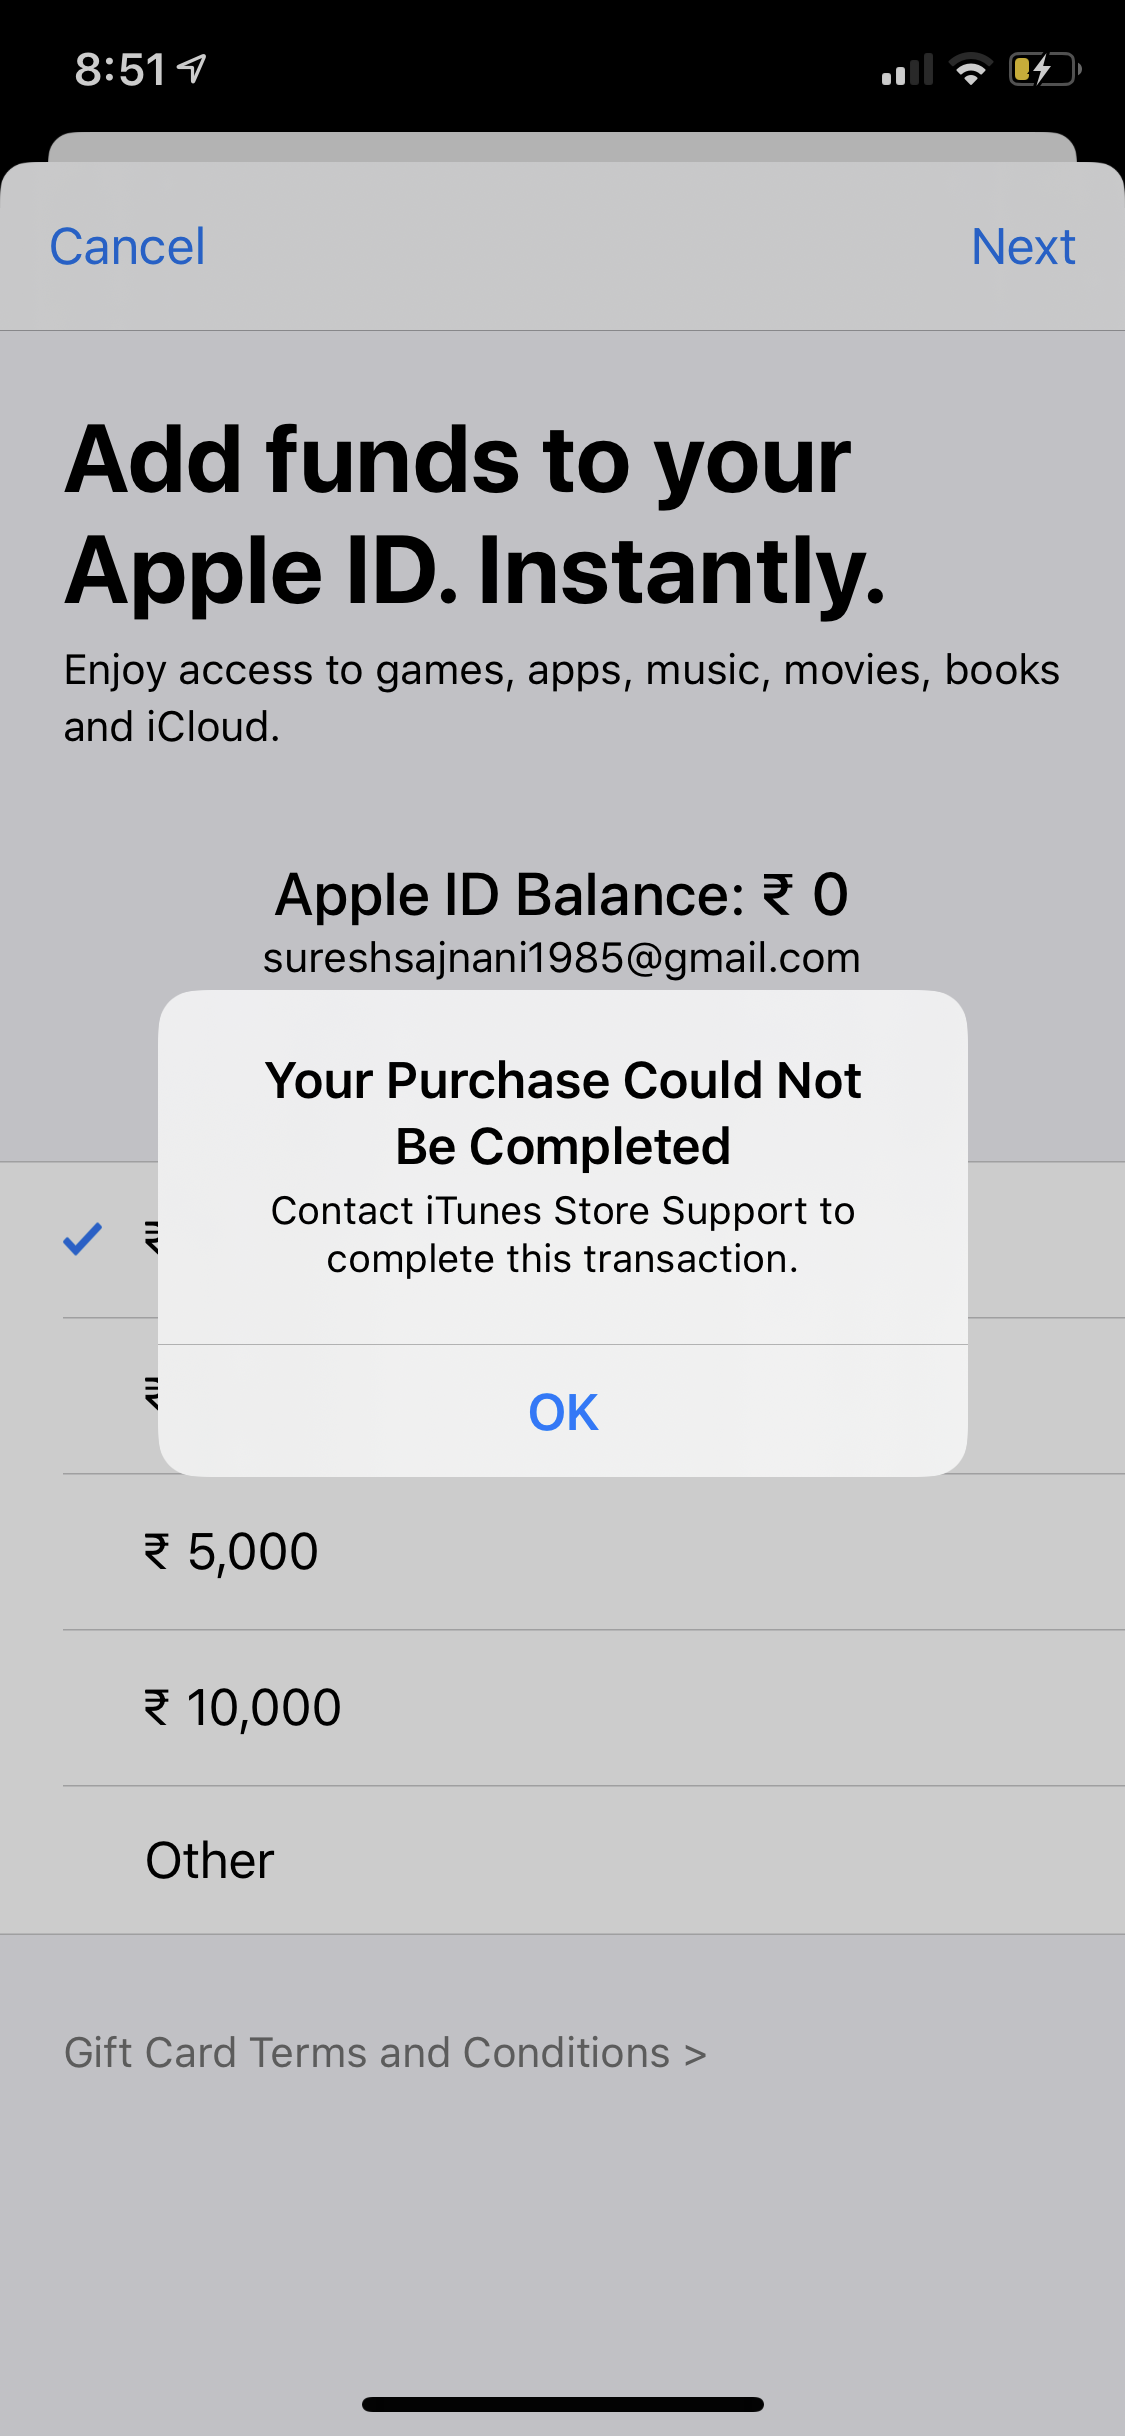 unable to redeem my Apple Store gift card… - Apple Community